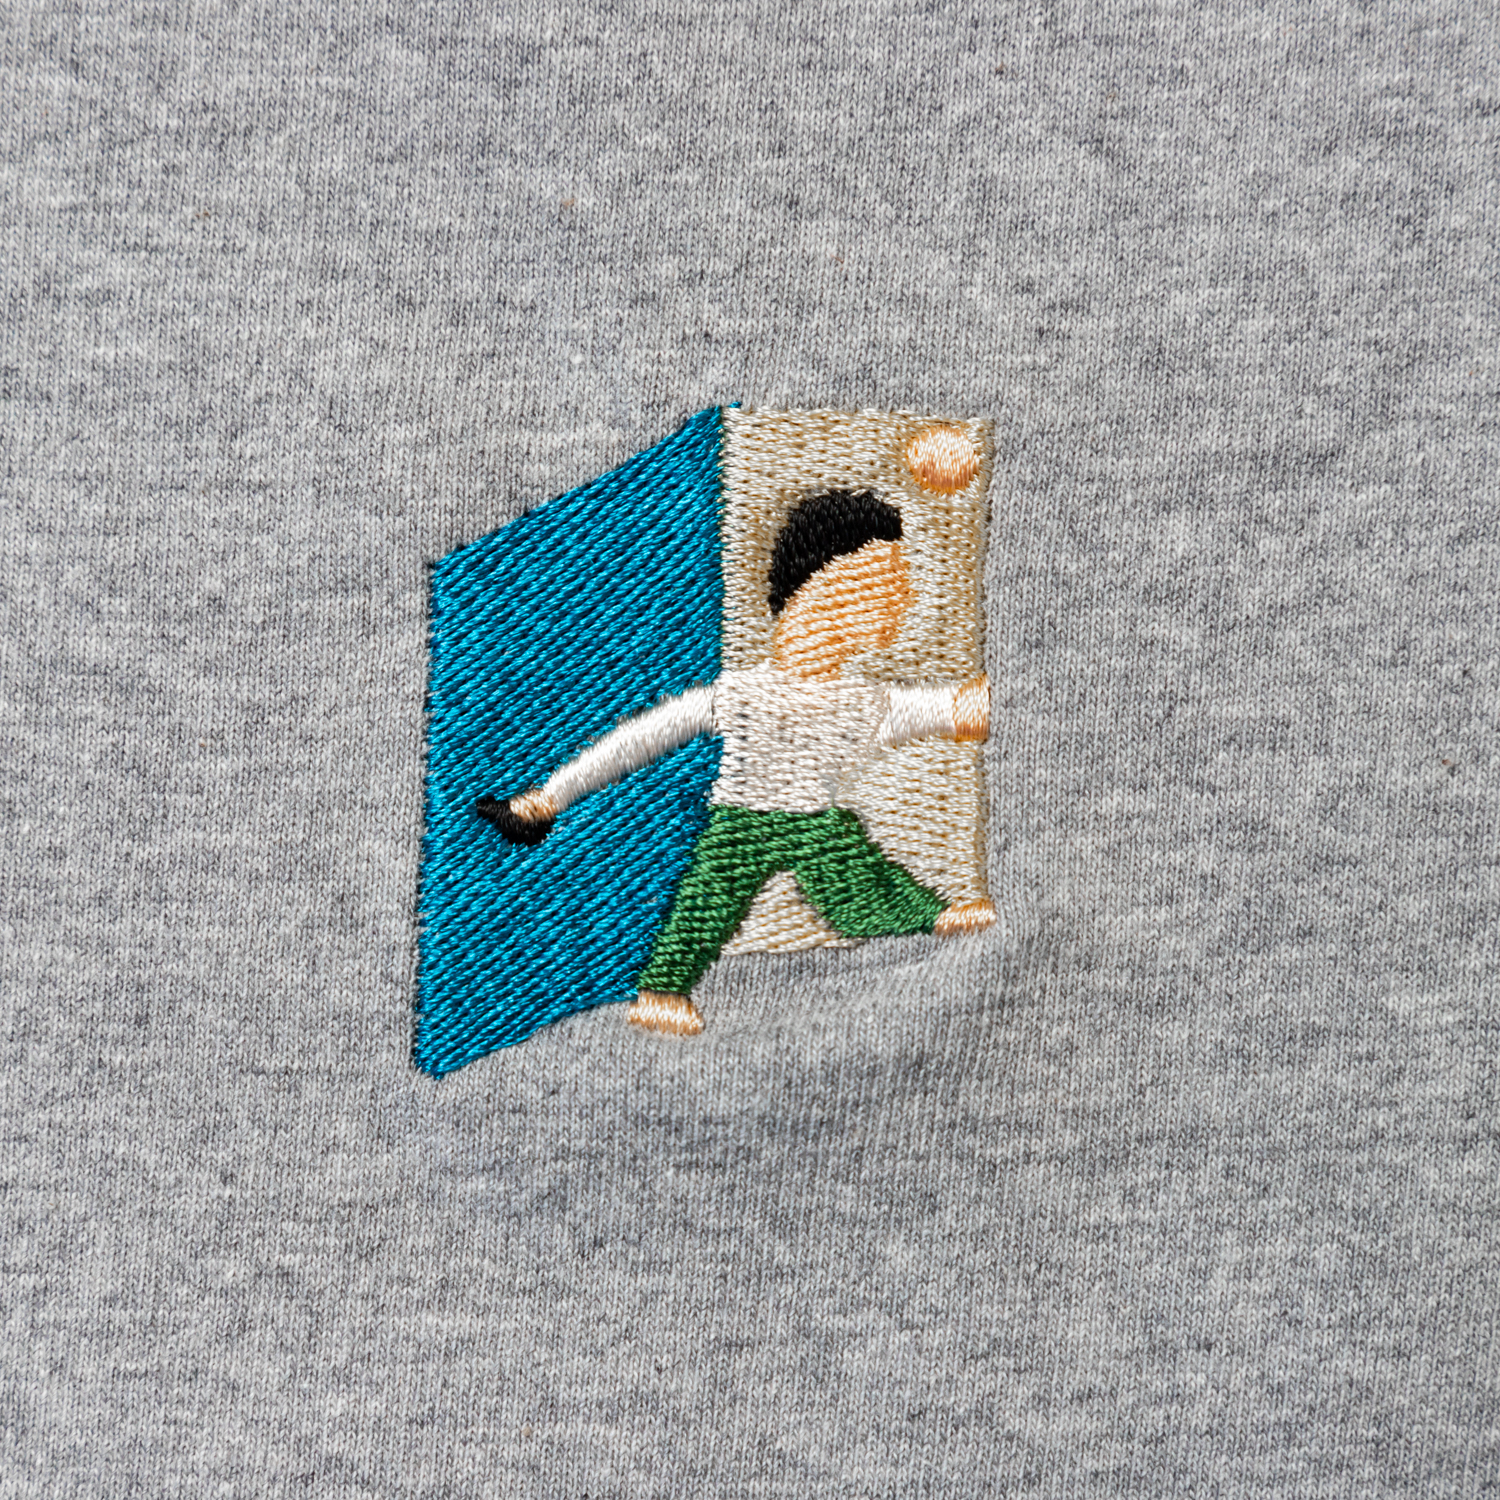 GOOD BYE embroidery Tee designed by James Ulmer